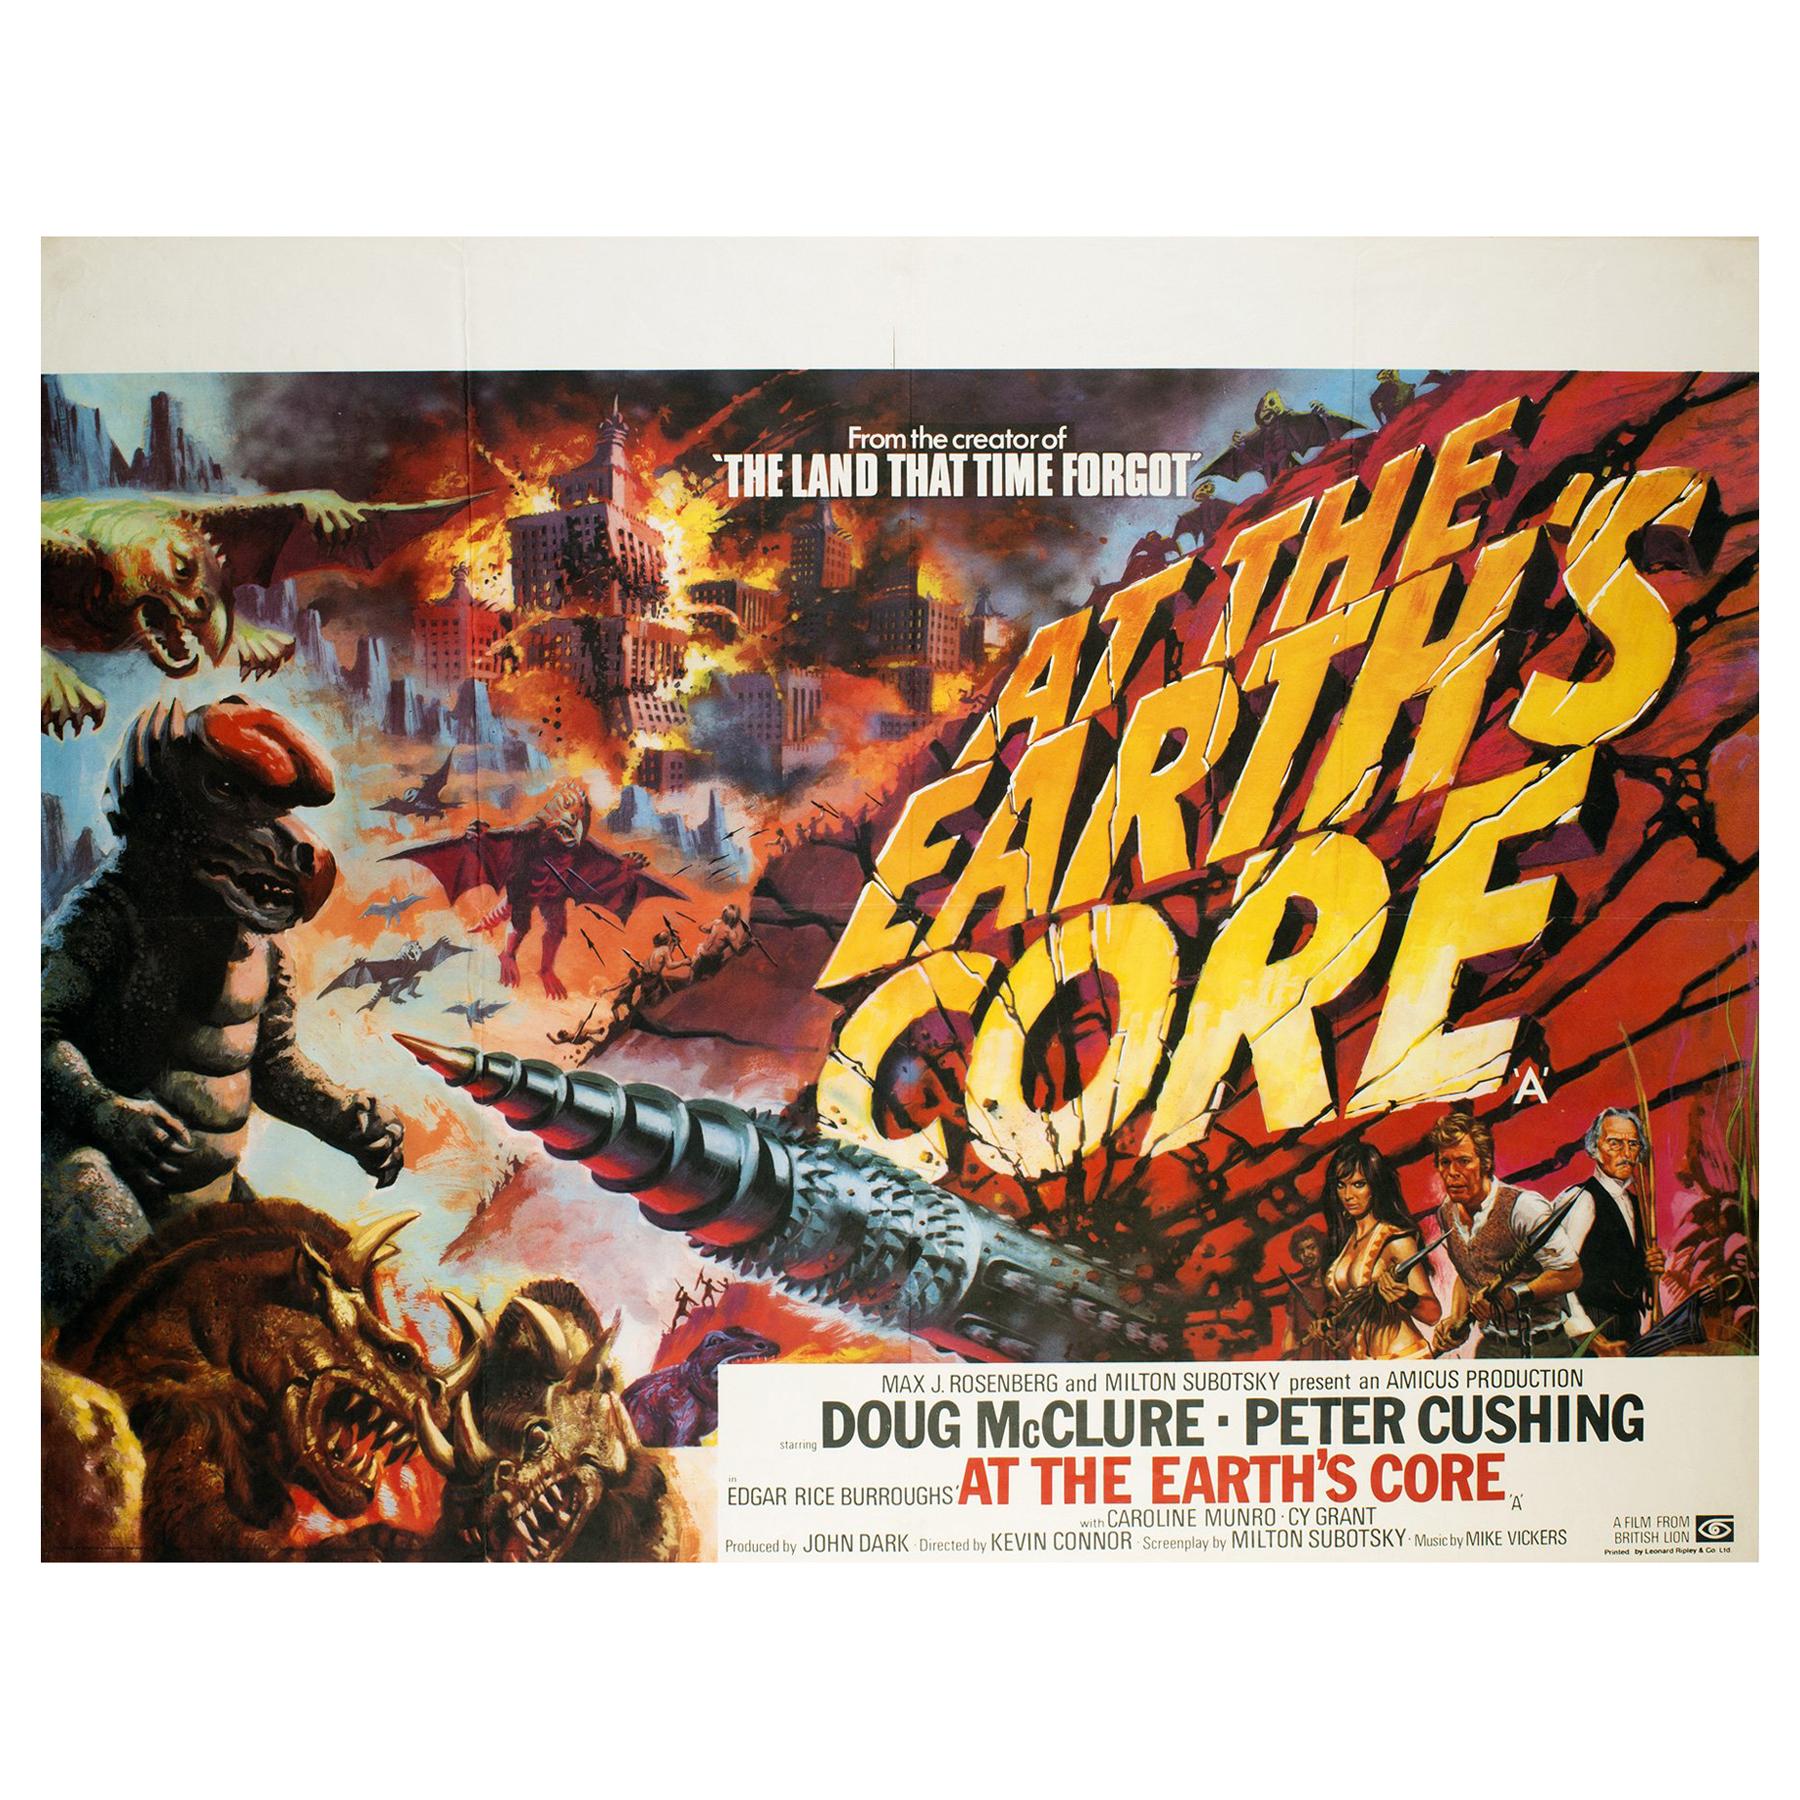 "At The Earth's Core" UK Film Poster, Tom Chantrell, 1976